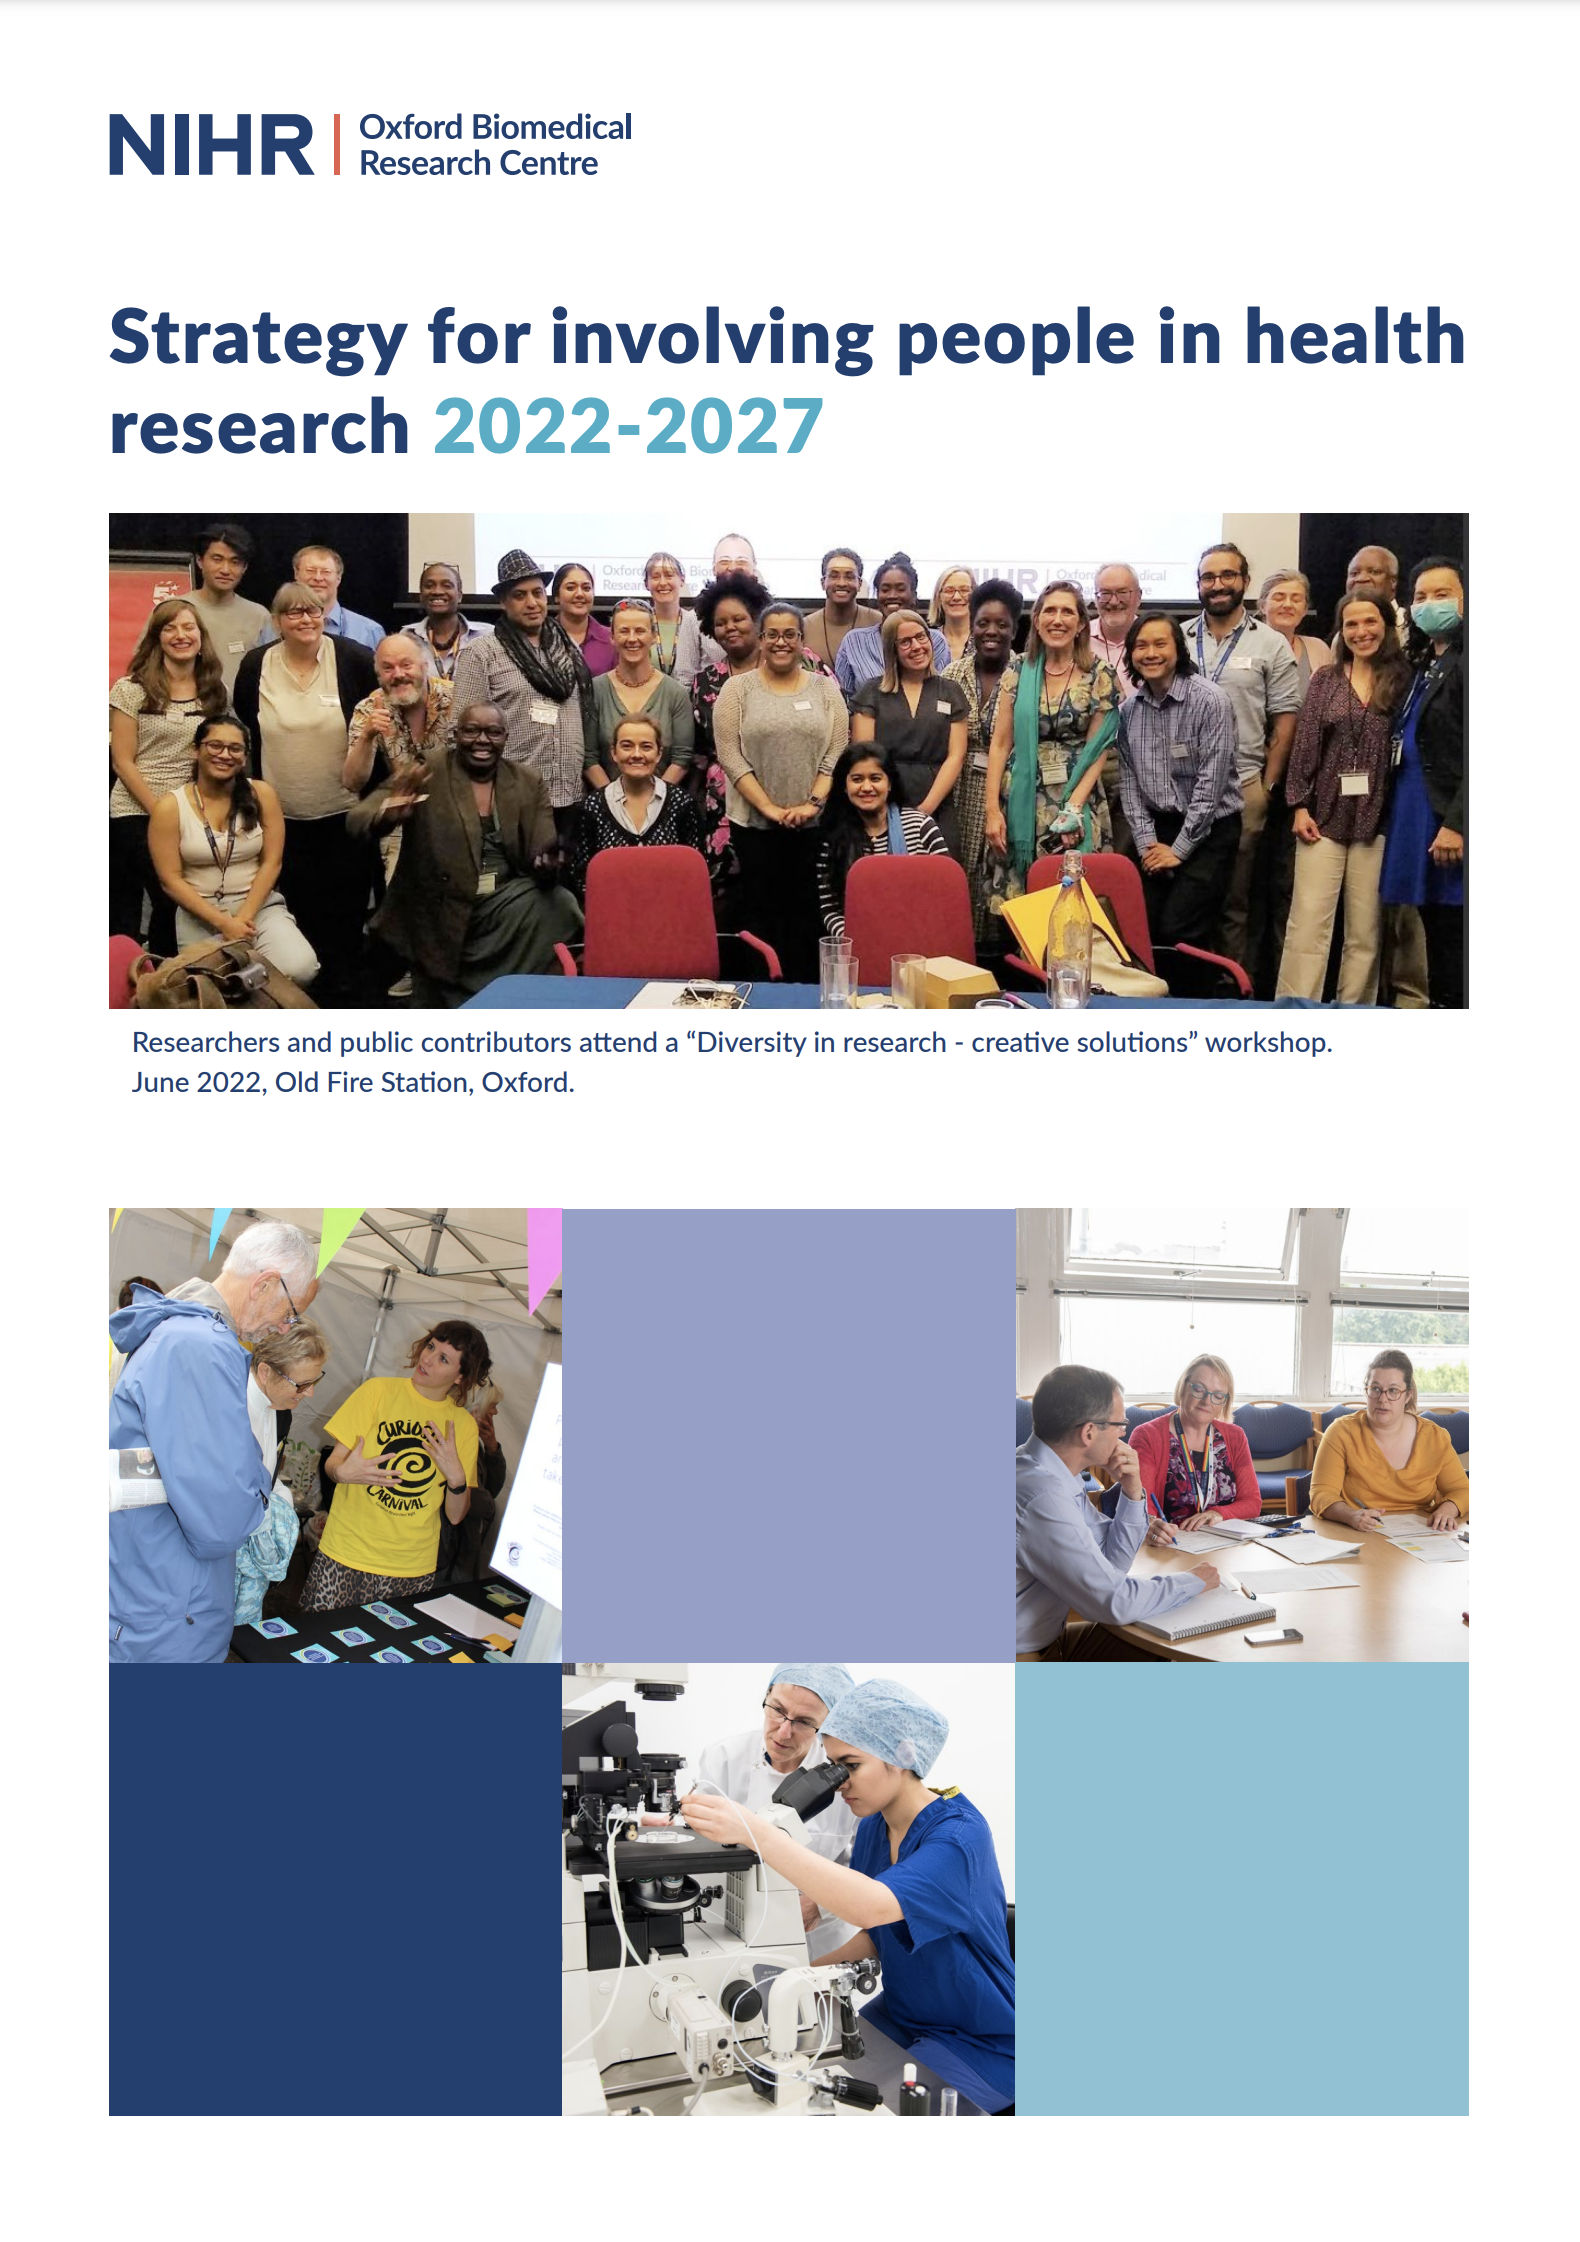 Preview of PDF link: Strategy for involving people in health research 2022-2027 /